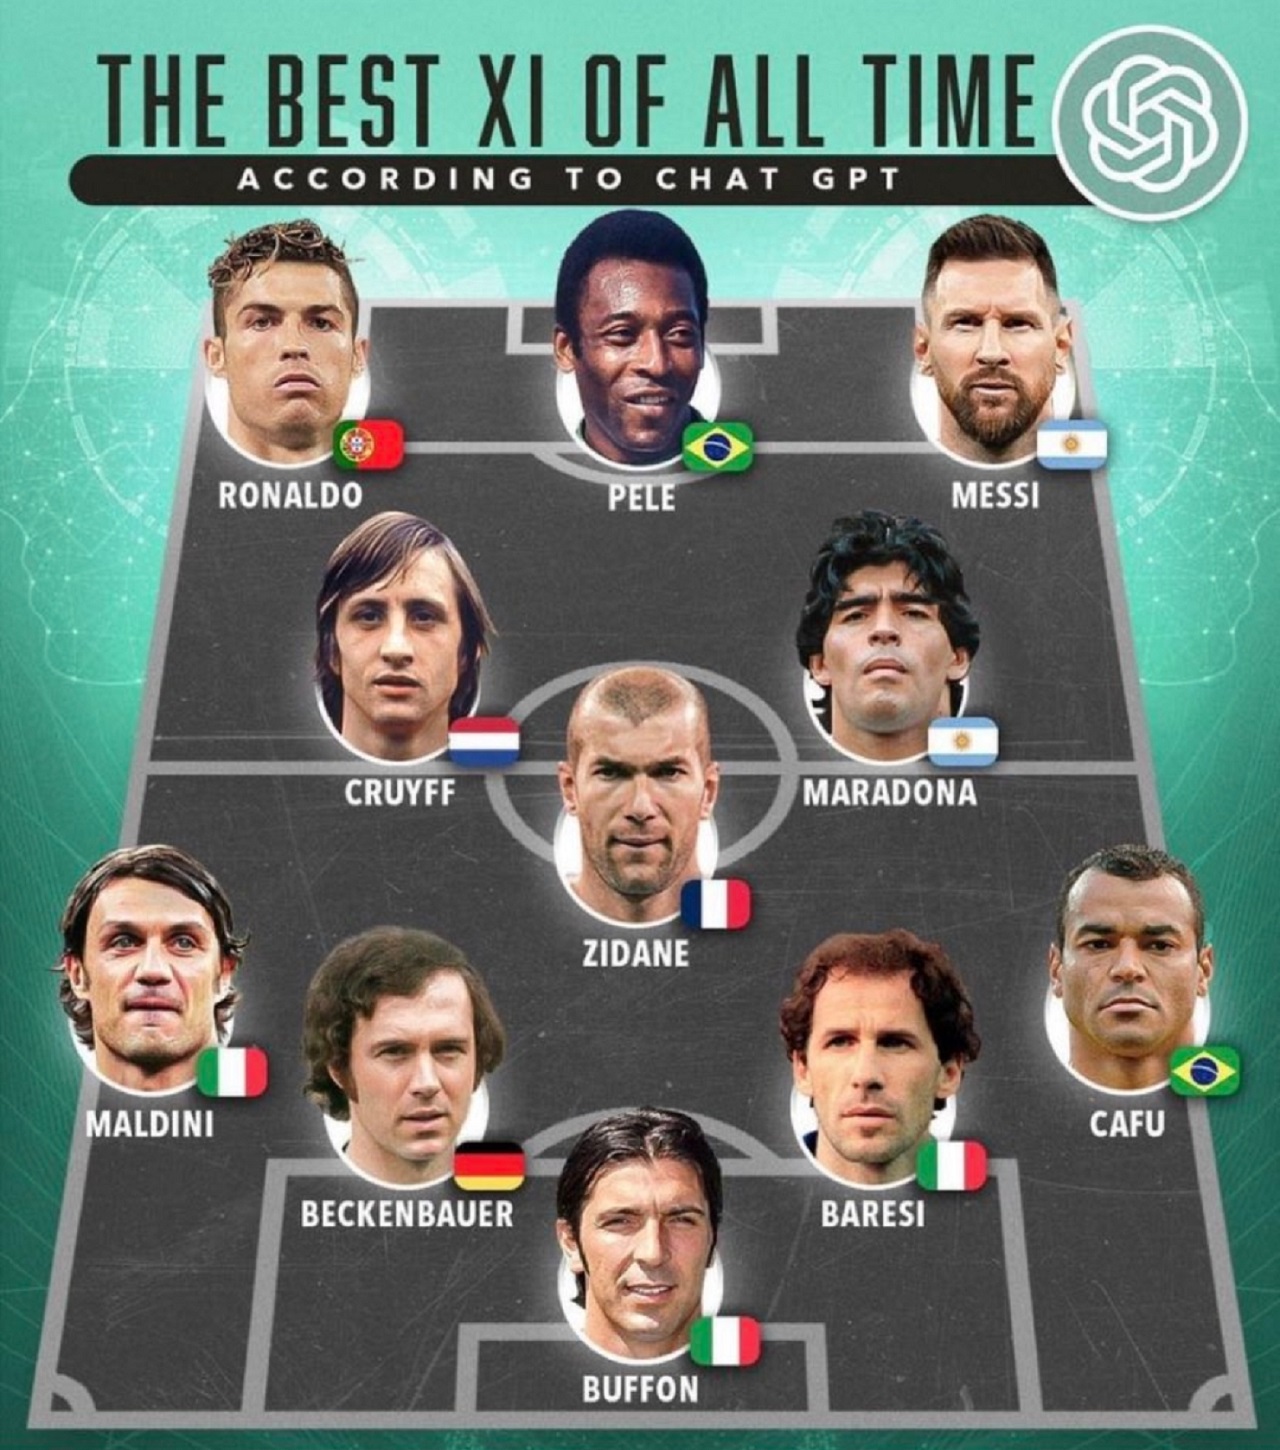 best-xi-of-all-time-according-to chat-gpt